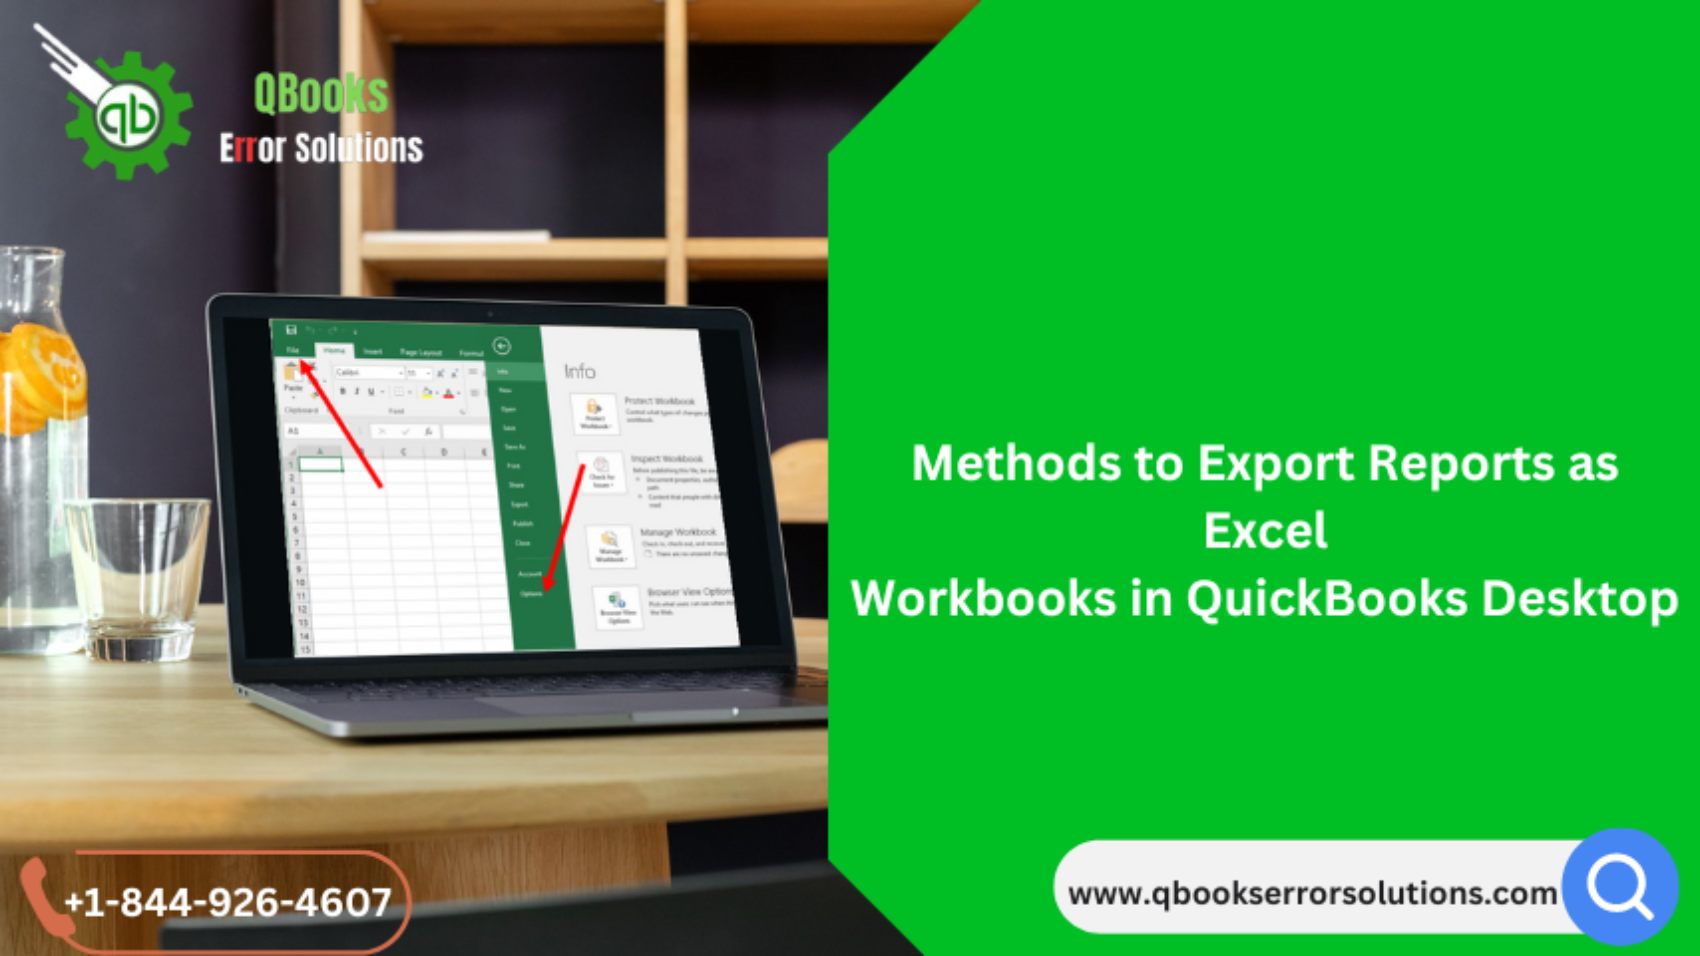 Guide to Export Reports as Excel Workbooks in QuickBooks Desktop